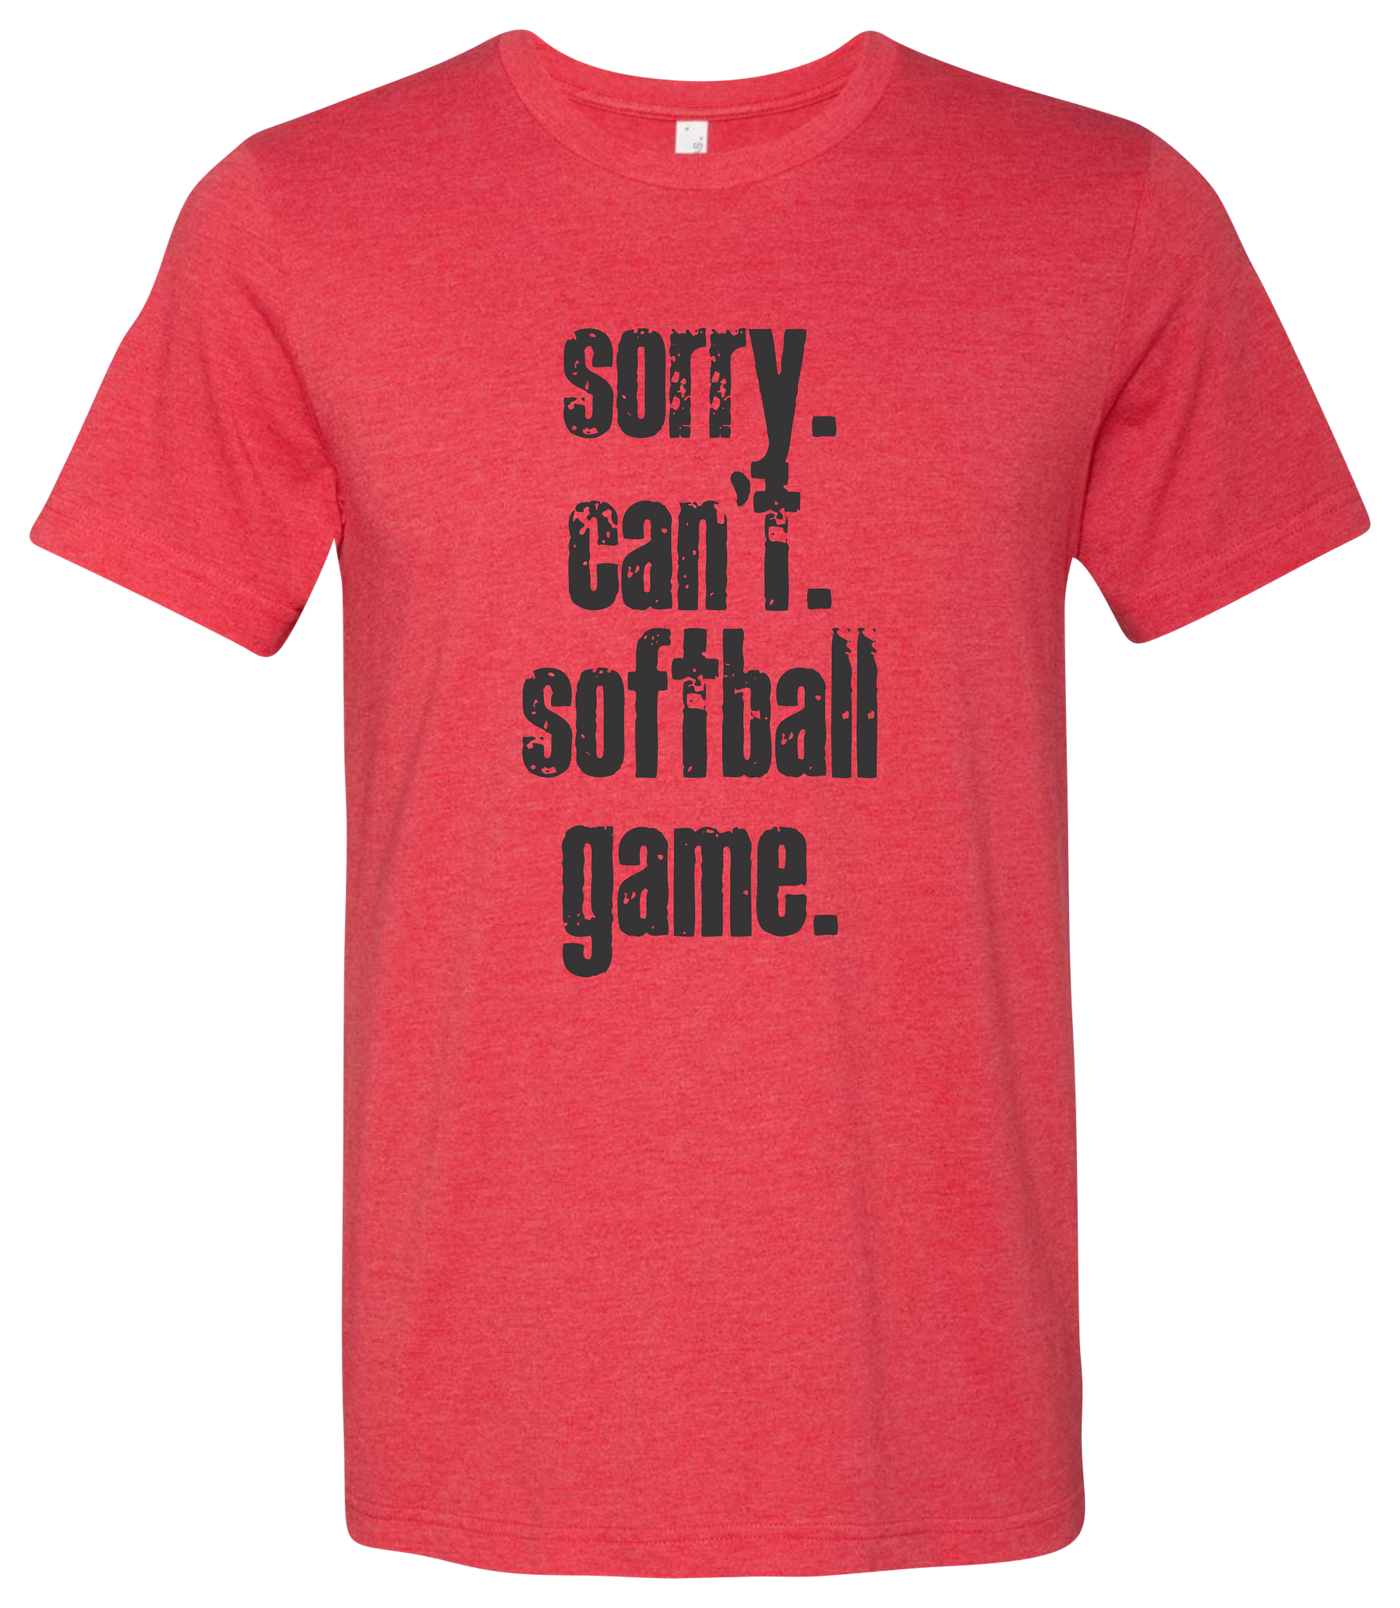 Sorry. Can't. Softball Game. Short Sleeve Graphic T-shirt